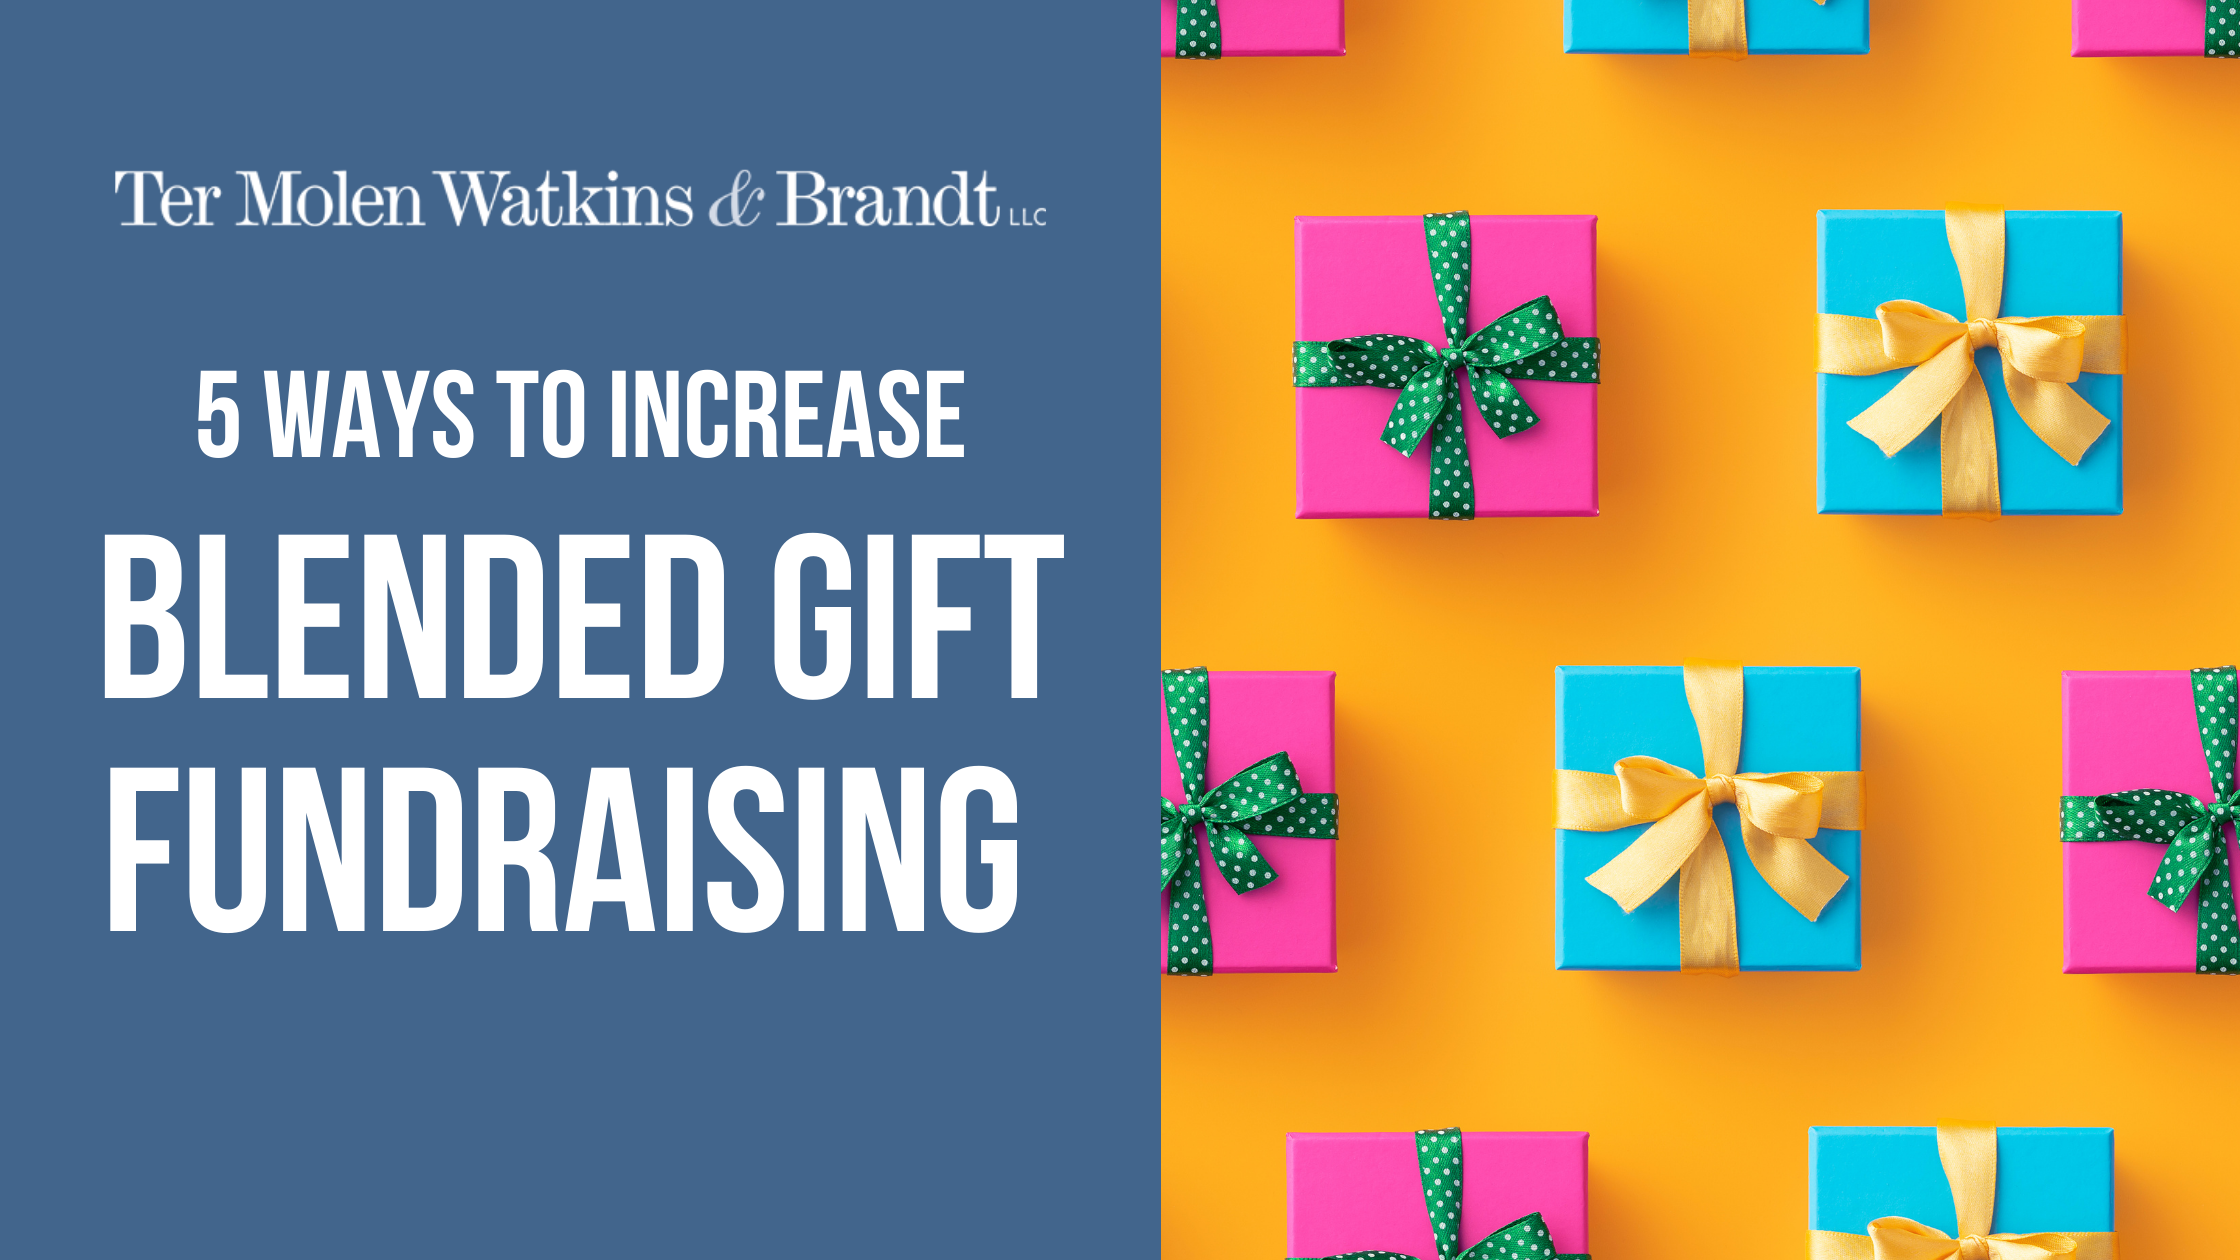 5 Ways to Increase Blended Gift Fundraising